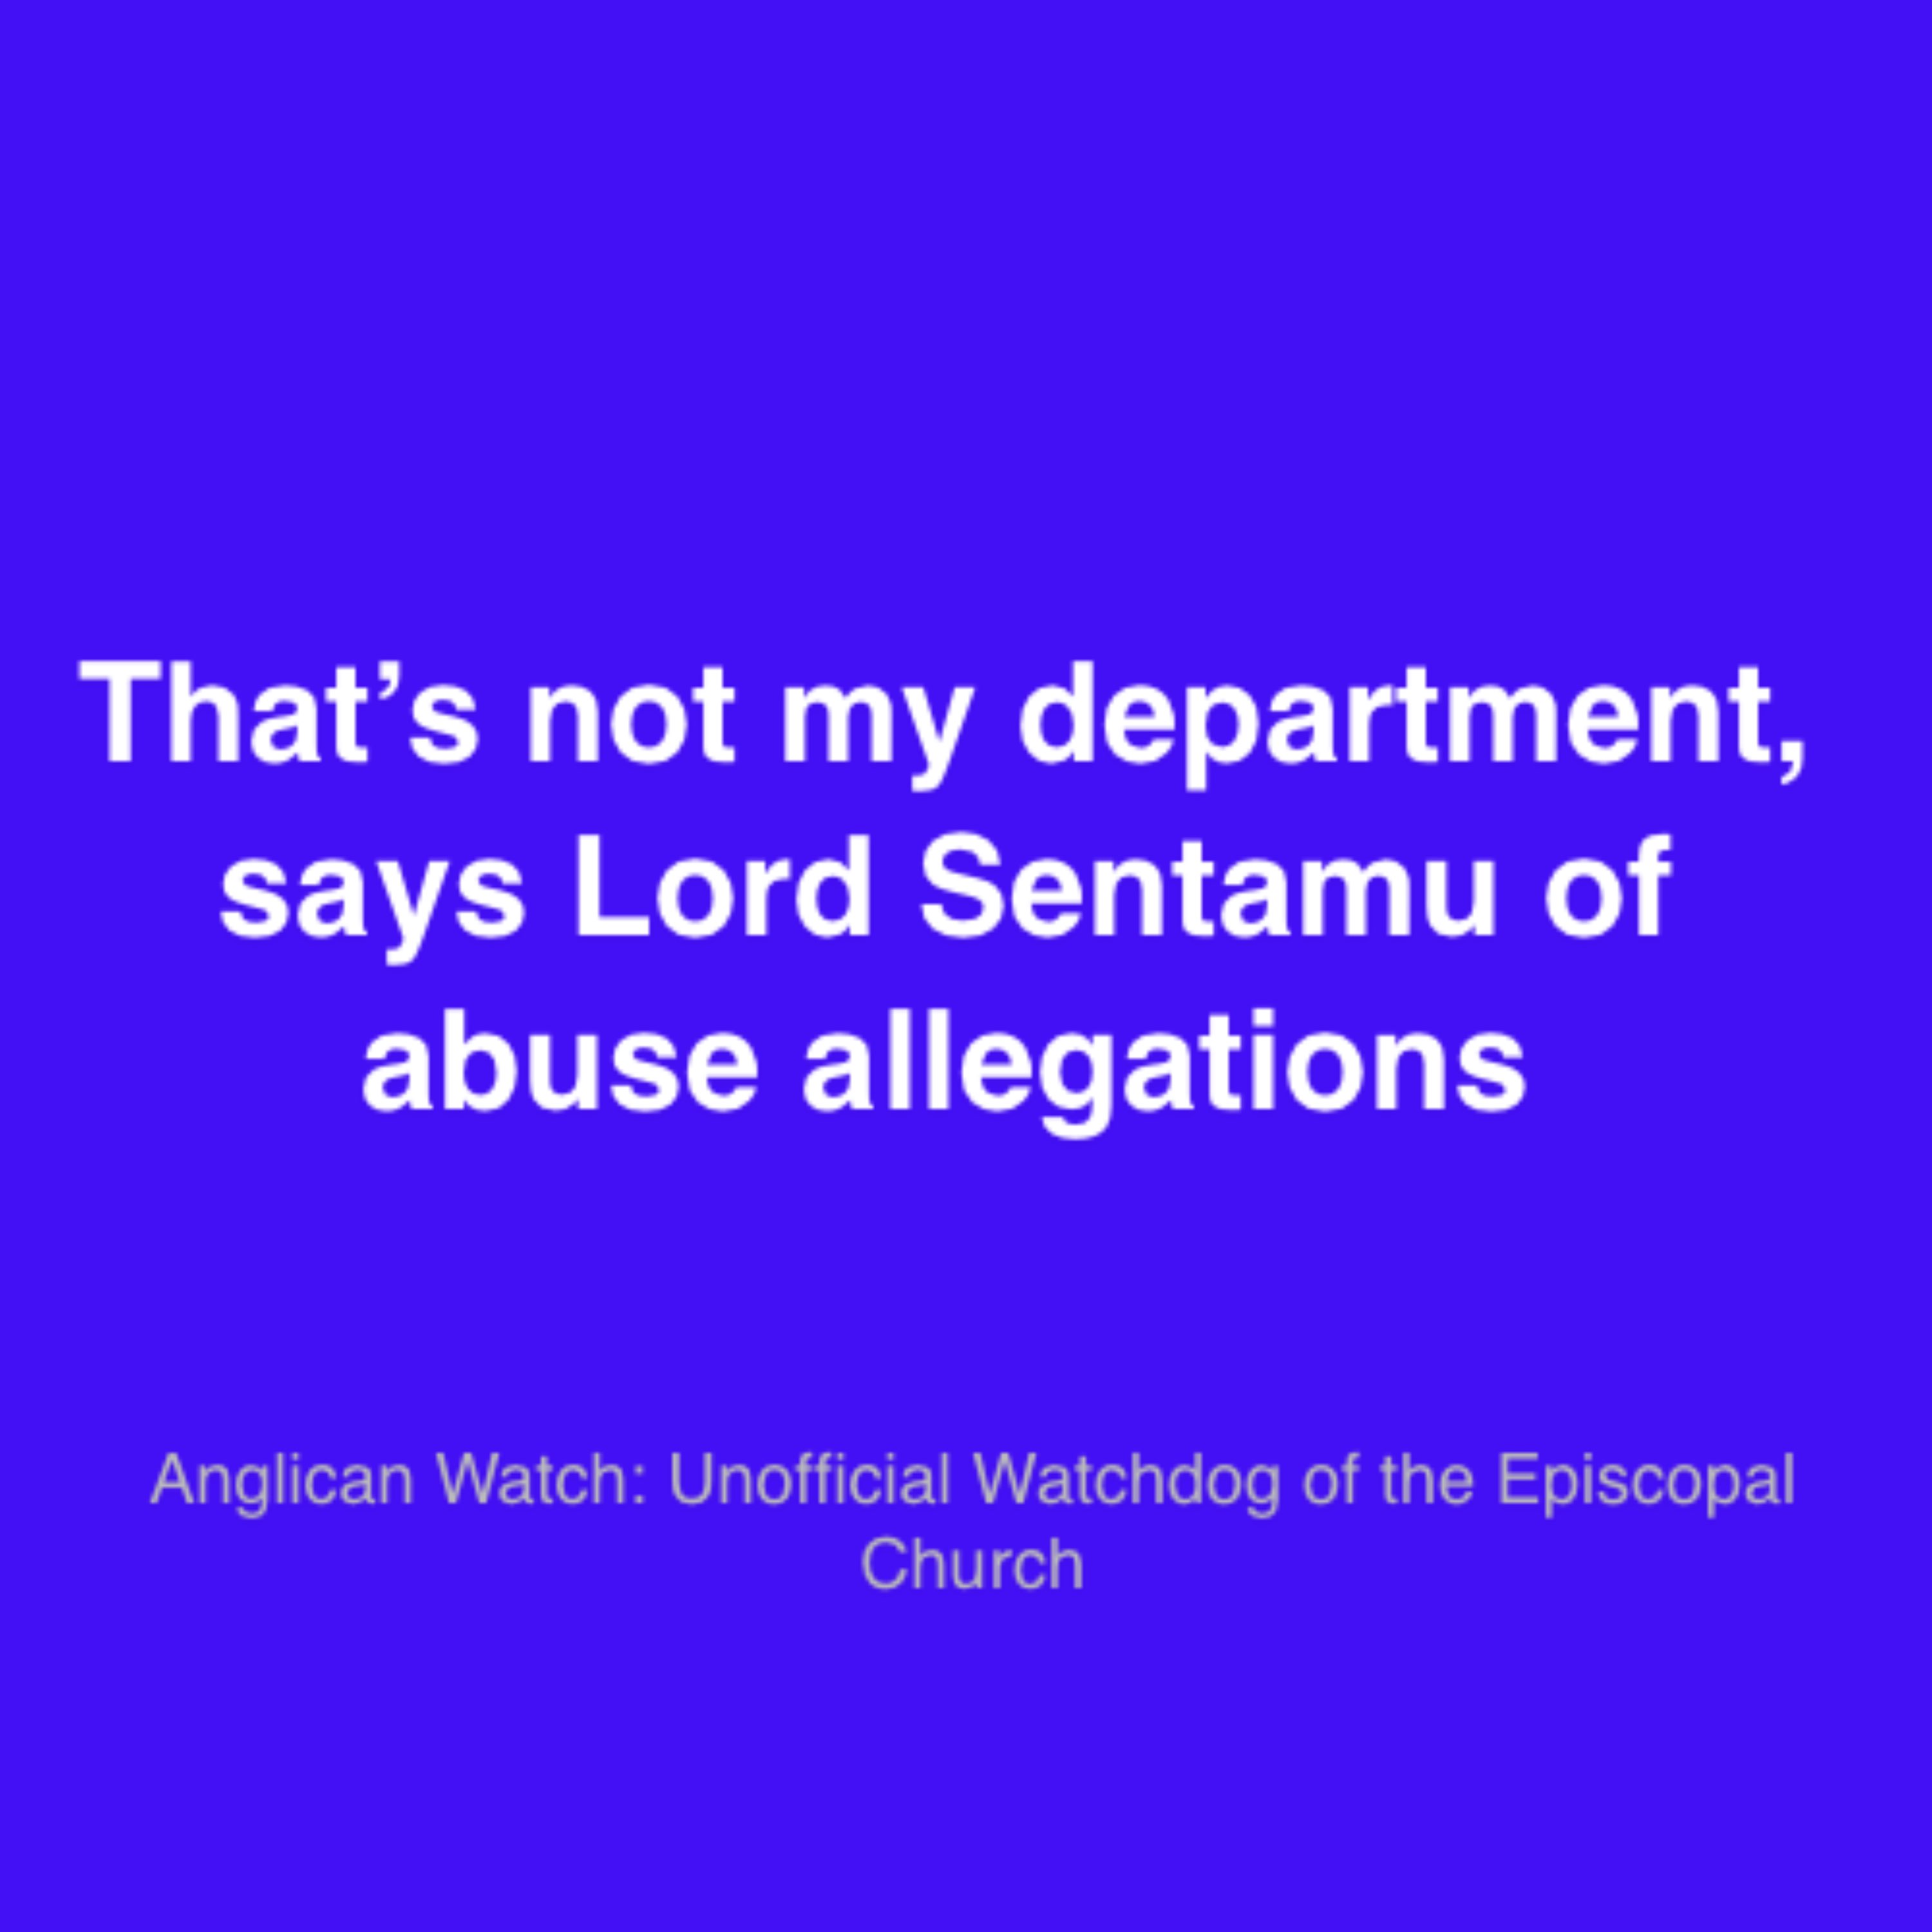 That’s not my department, says Lord Sentamu of abuse allegations